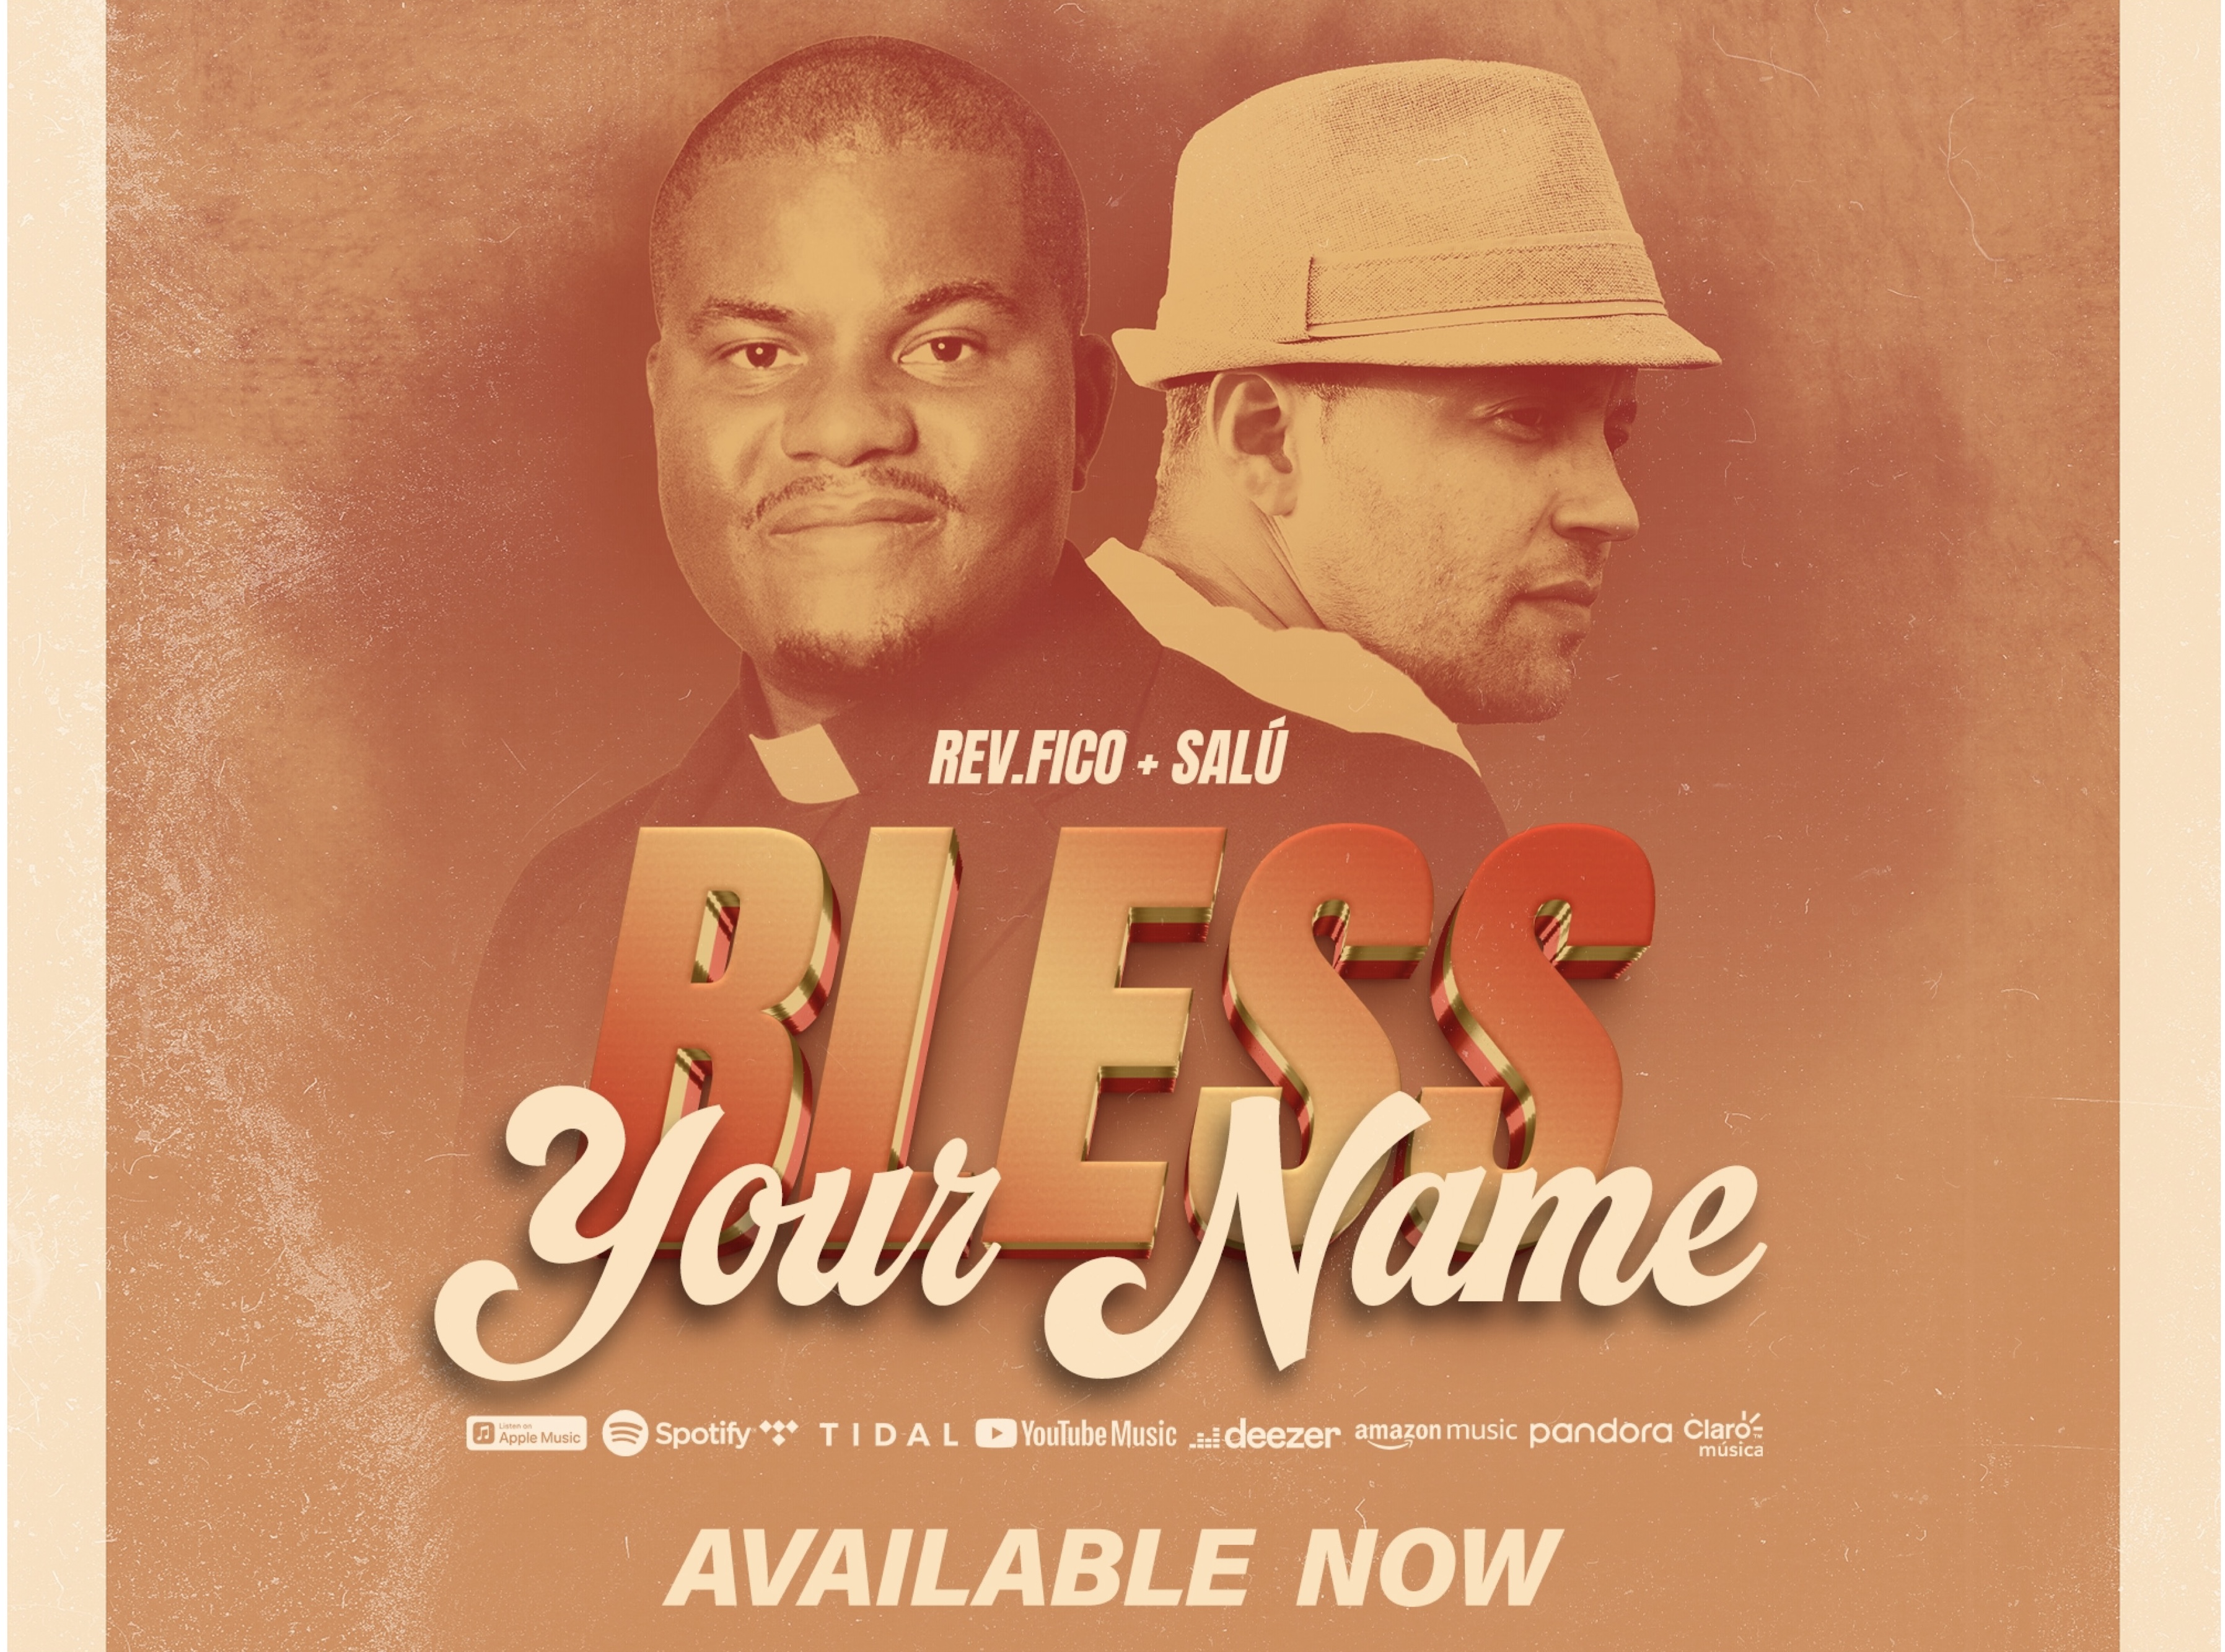 BLESS YOUR NAME is now available 